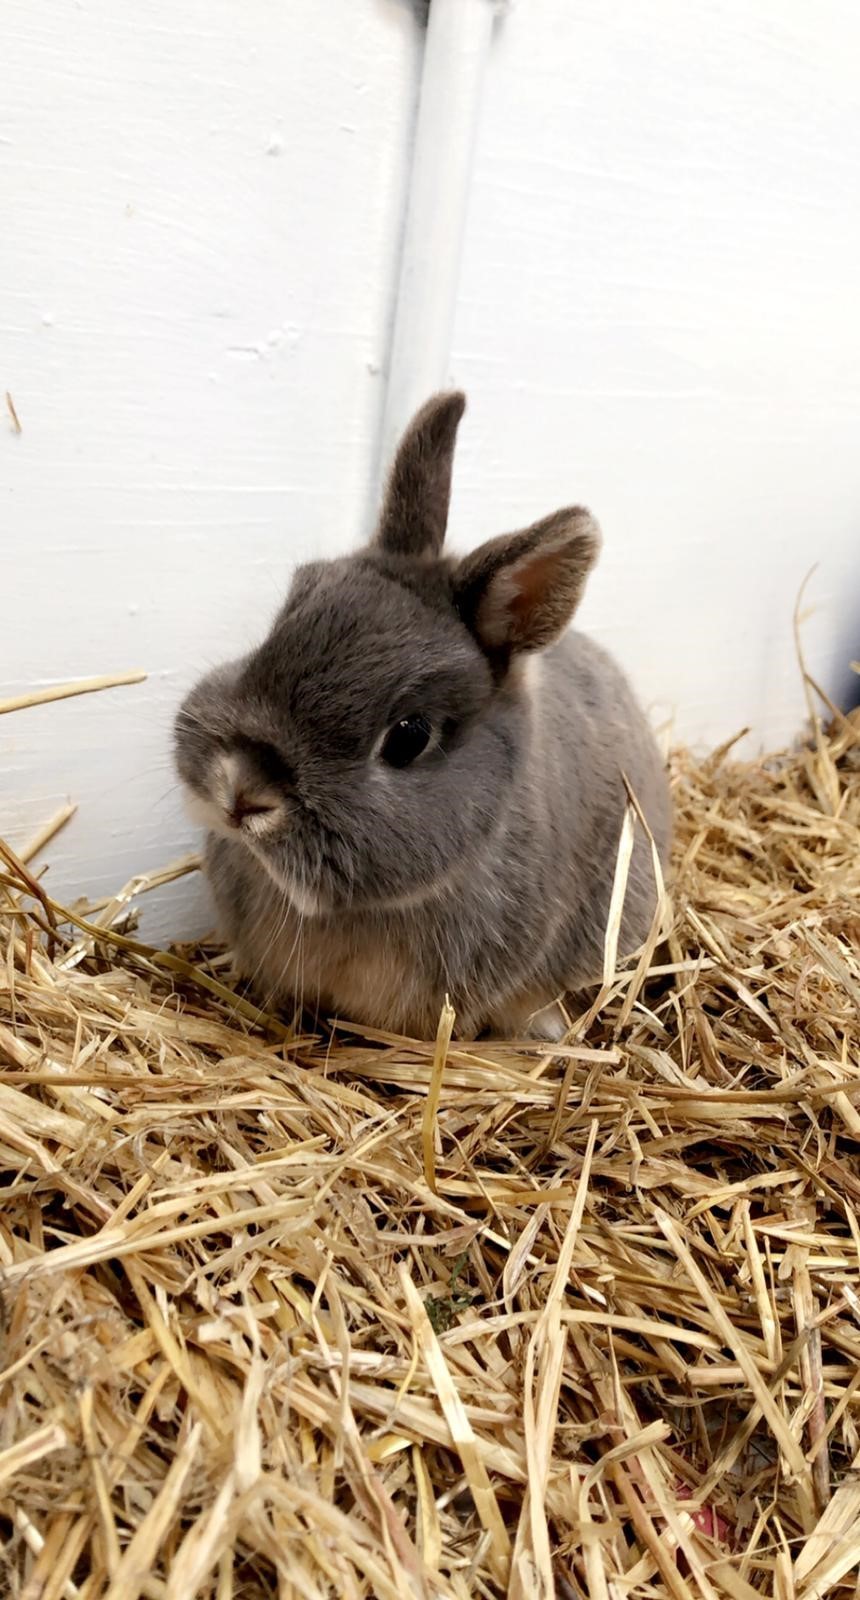 The Netherland dwarf rabbit is looking for a home with a female friend